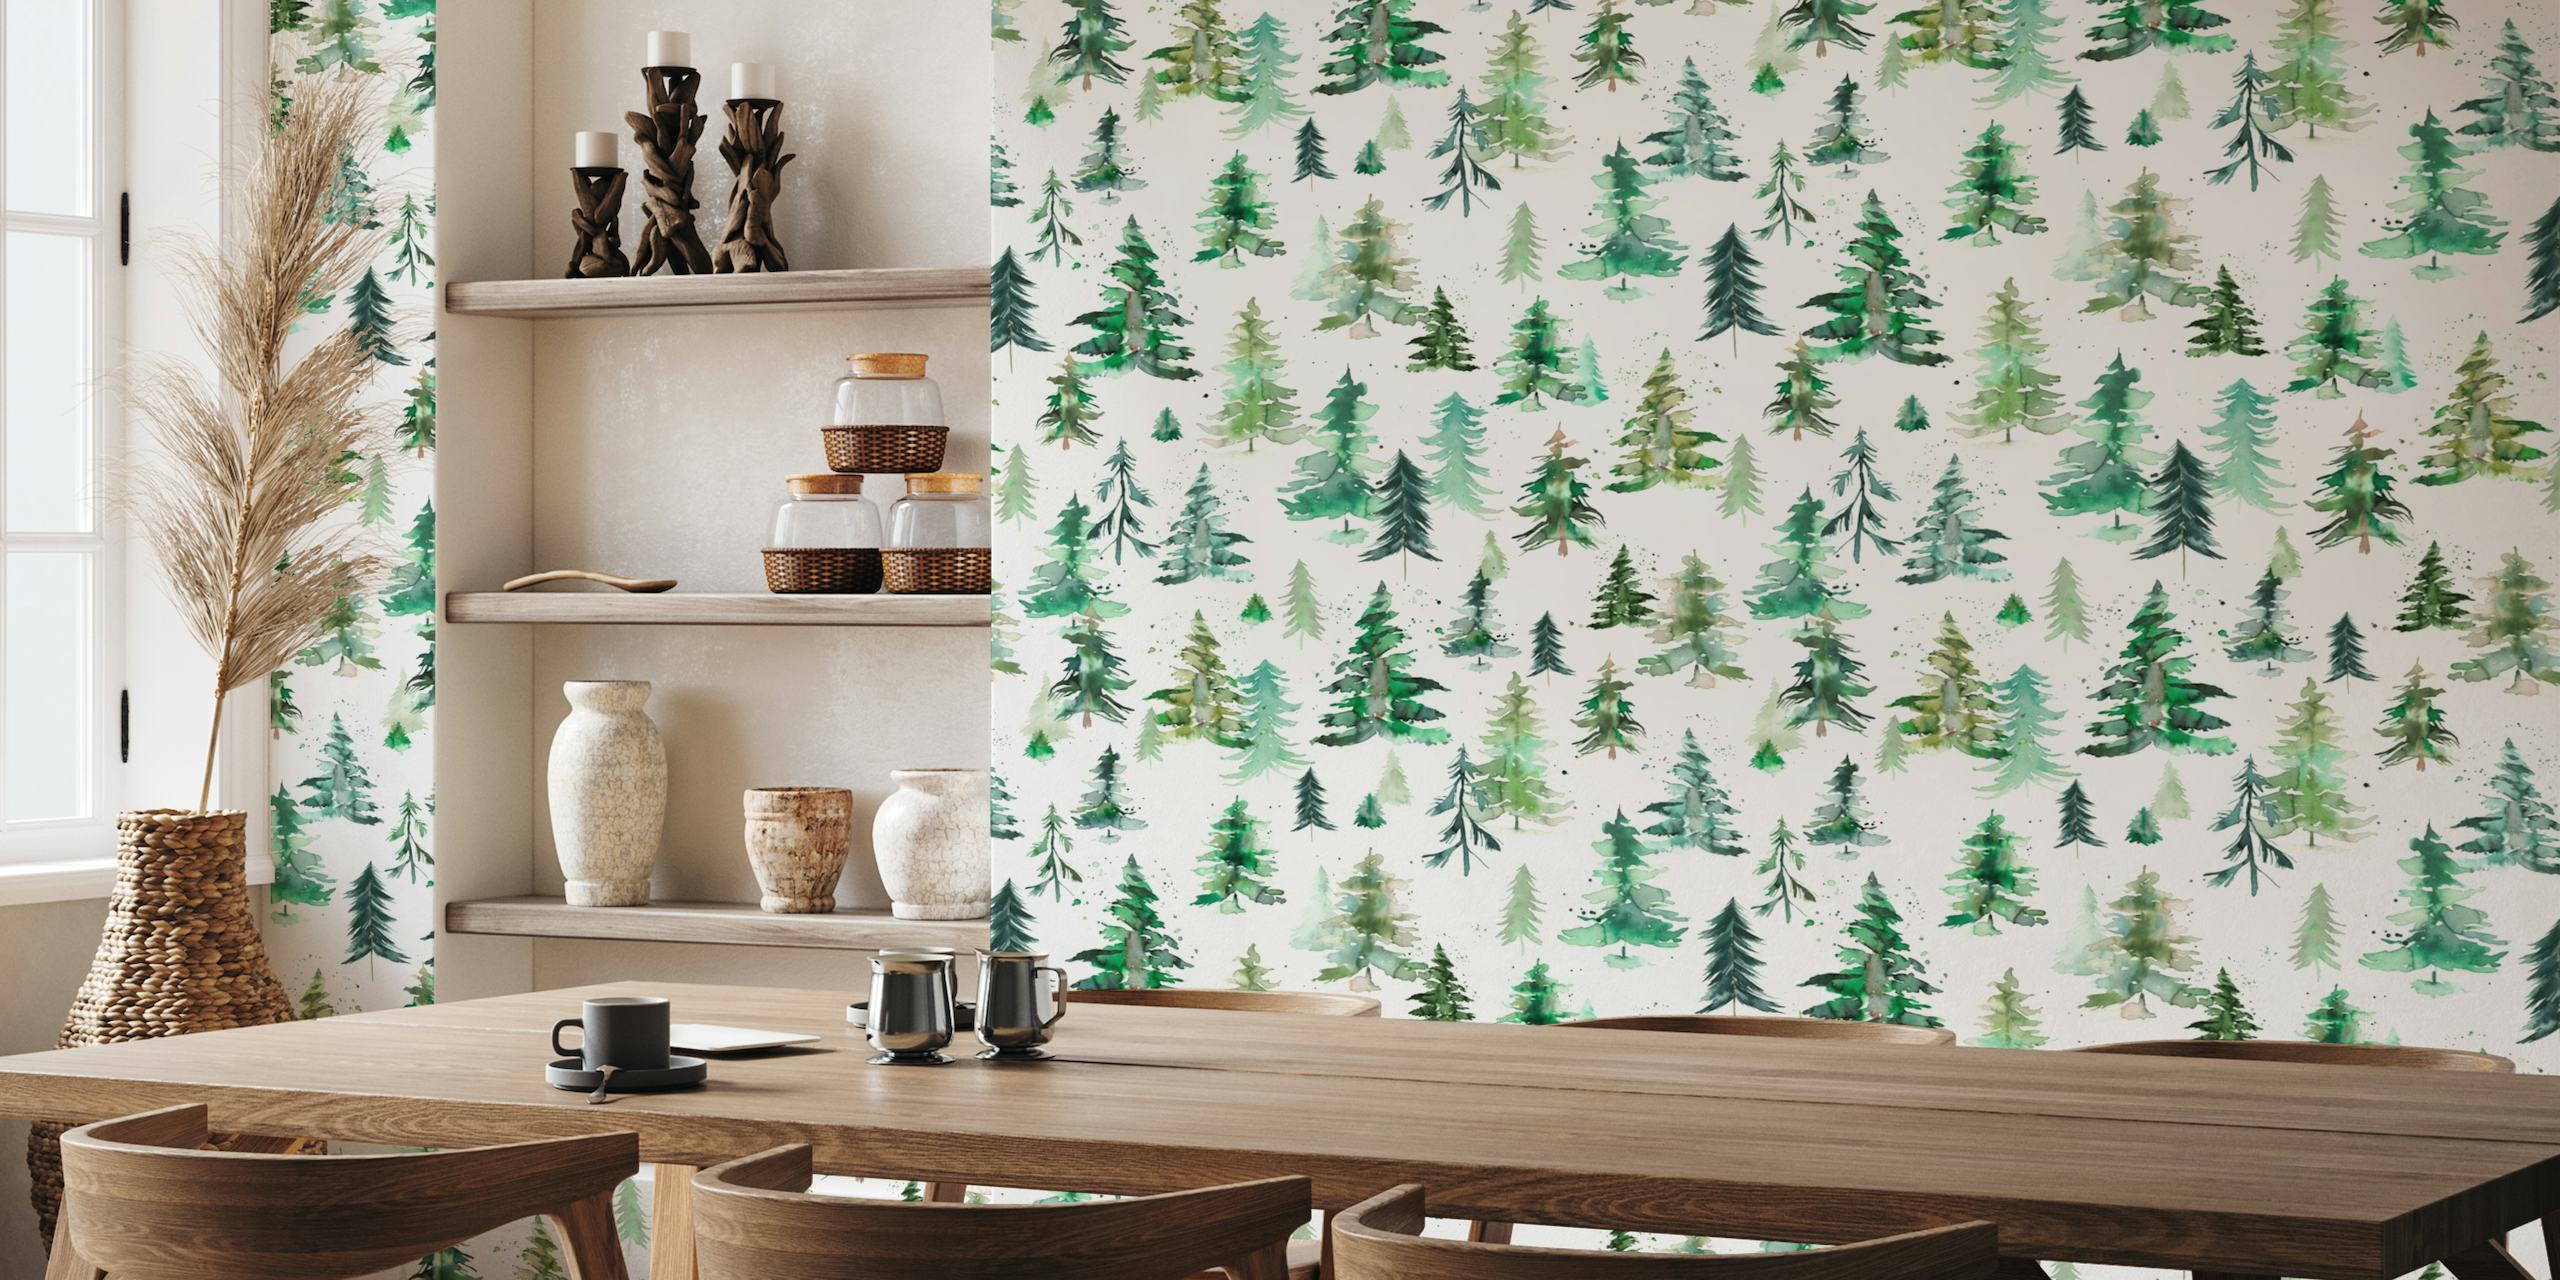 Illustrative forest and mountain wall mural depicting various trees on a white background